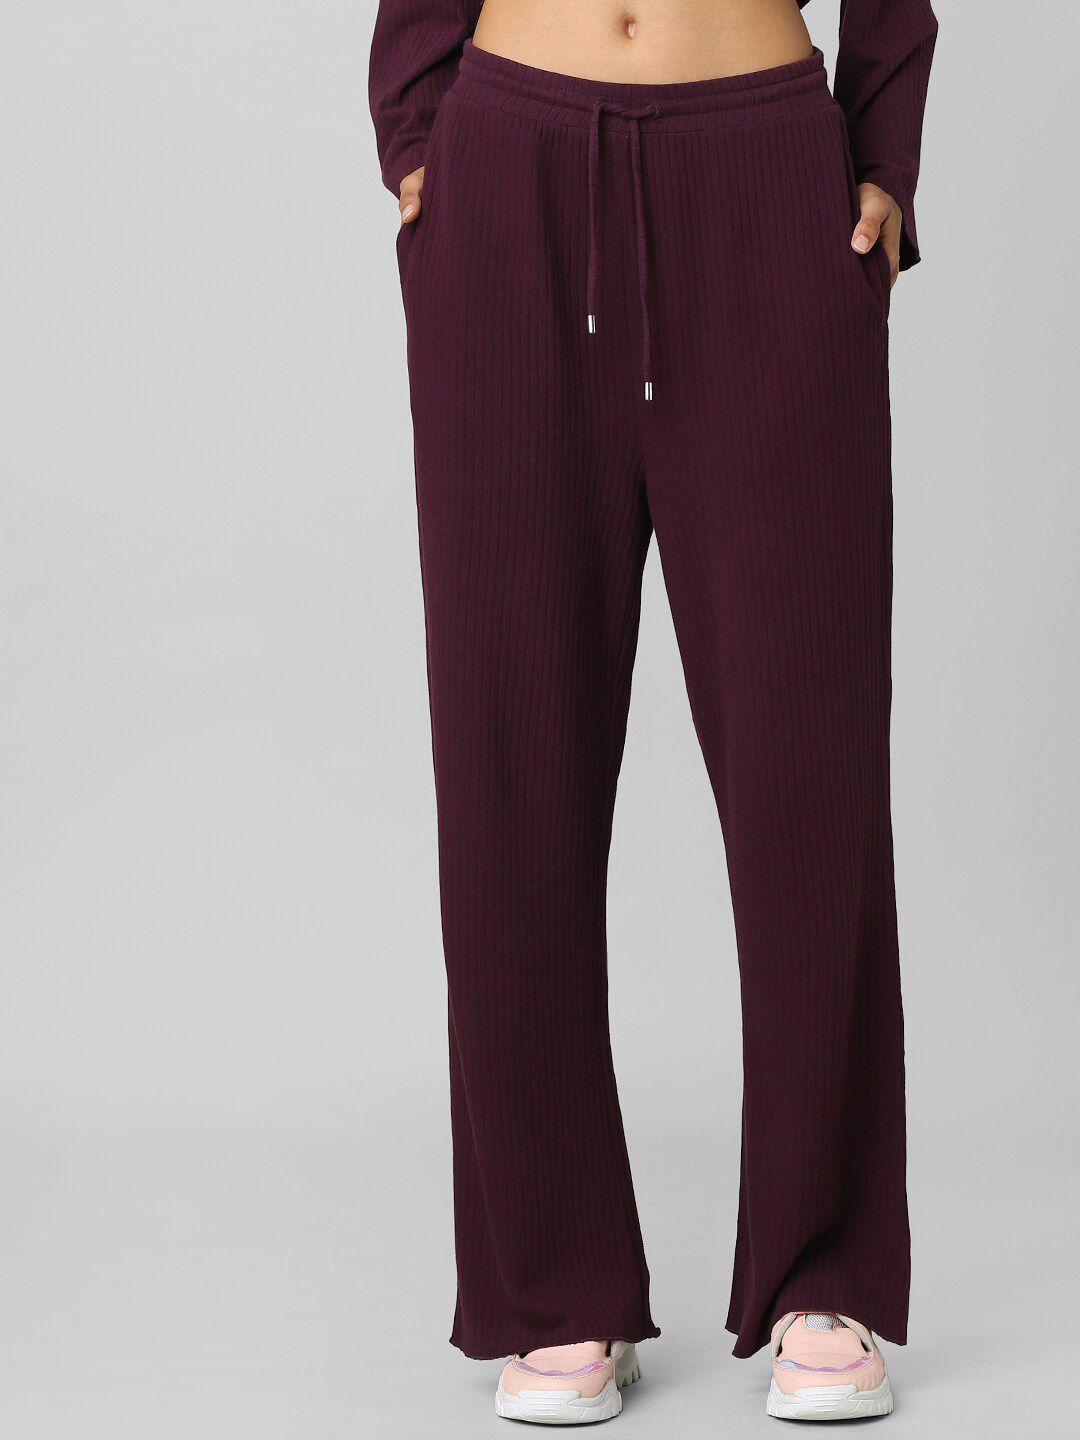 ONLY Women Maroon Flared High-Rise Trousers Price in India